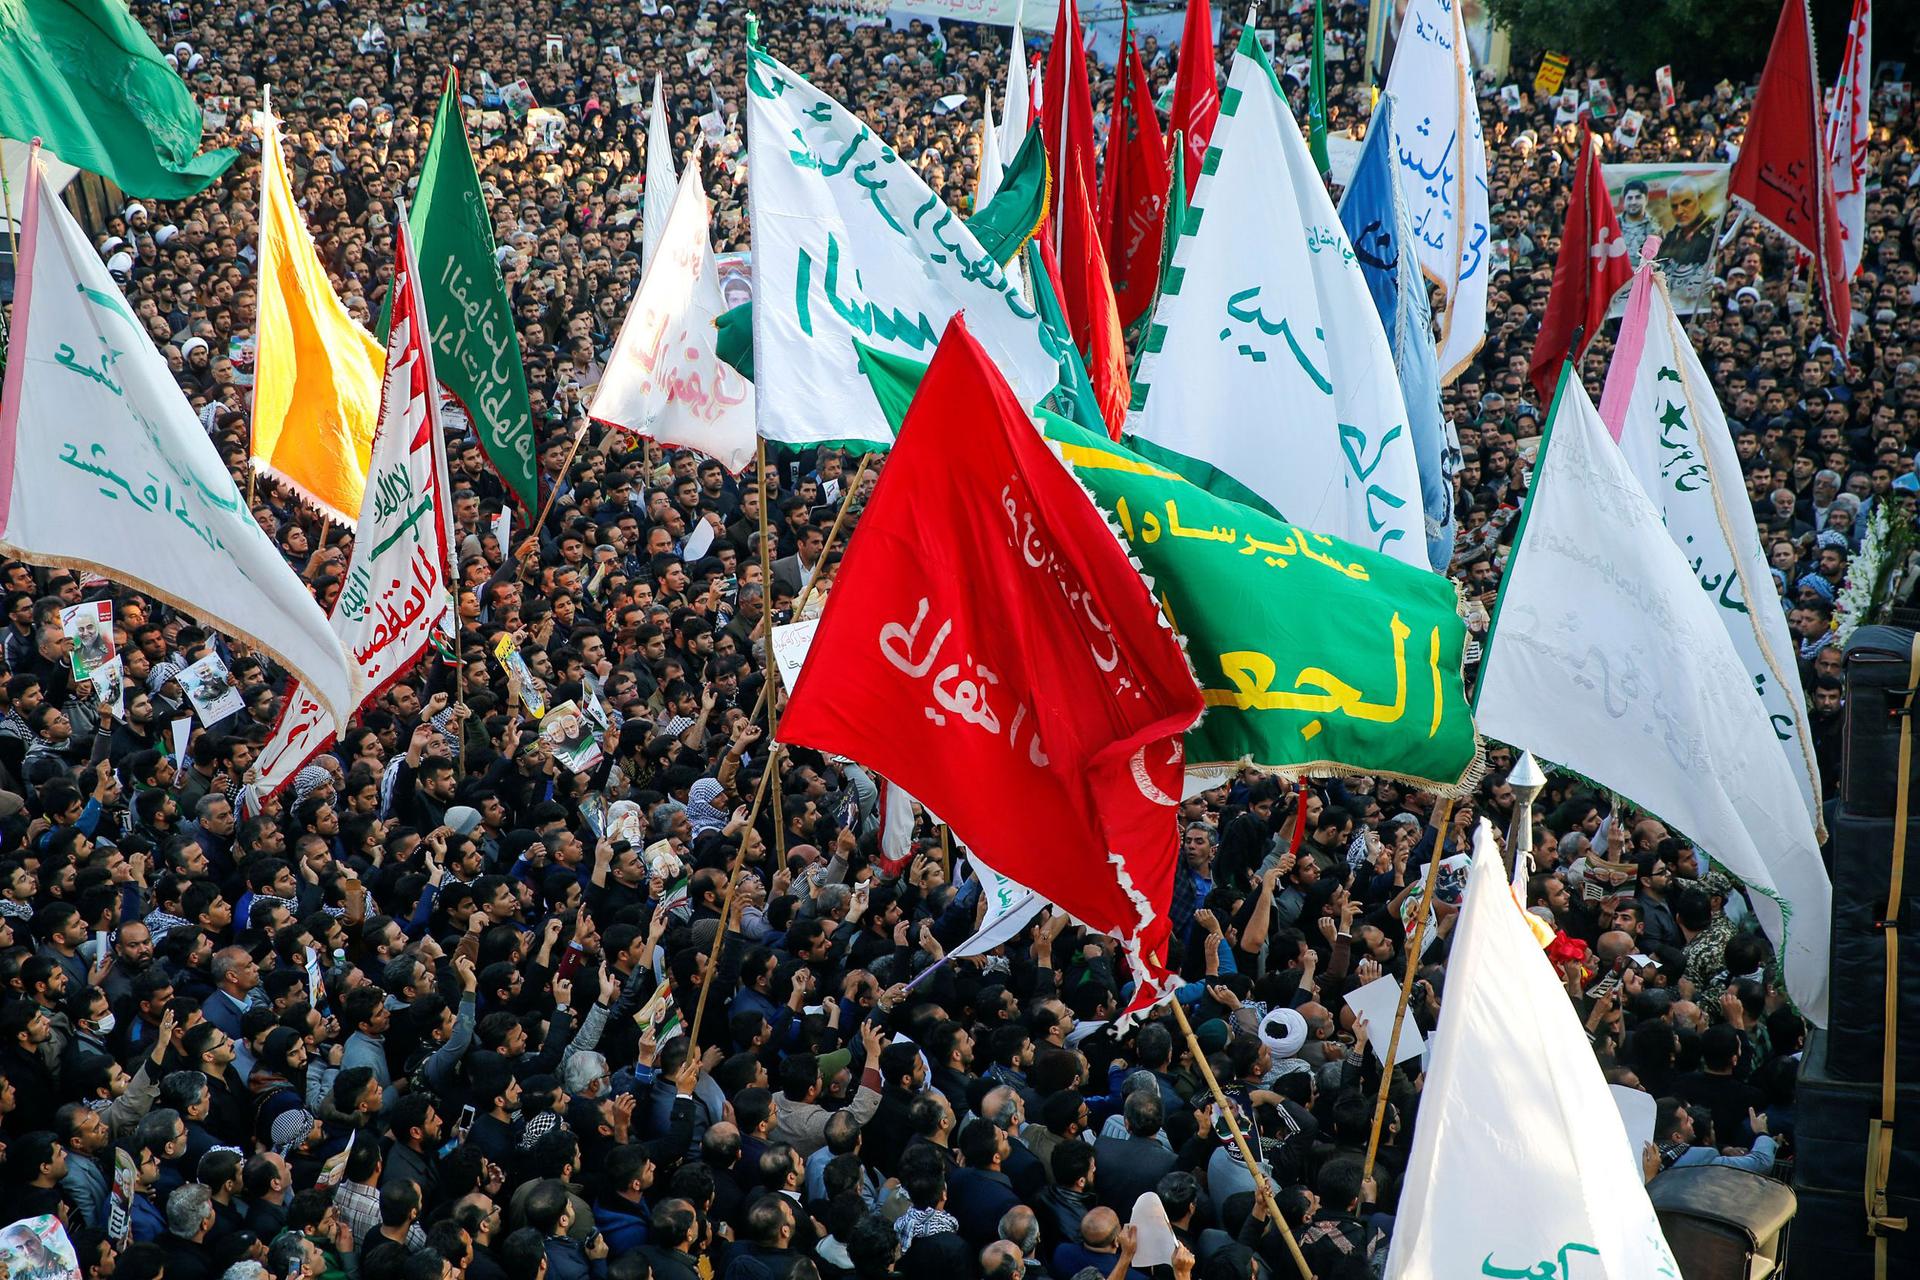 A large crowd of people are shown from above with dozens of flags waving.